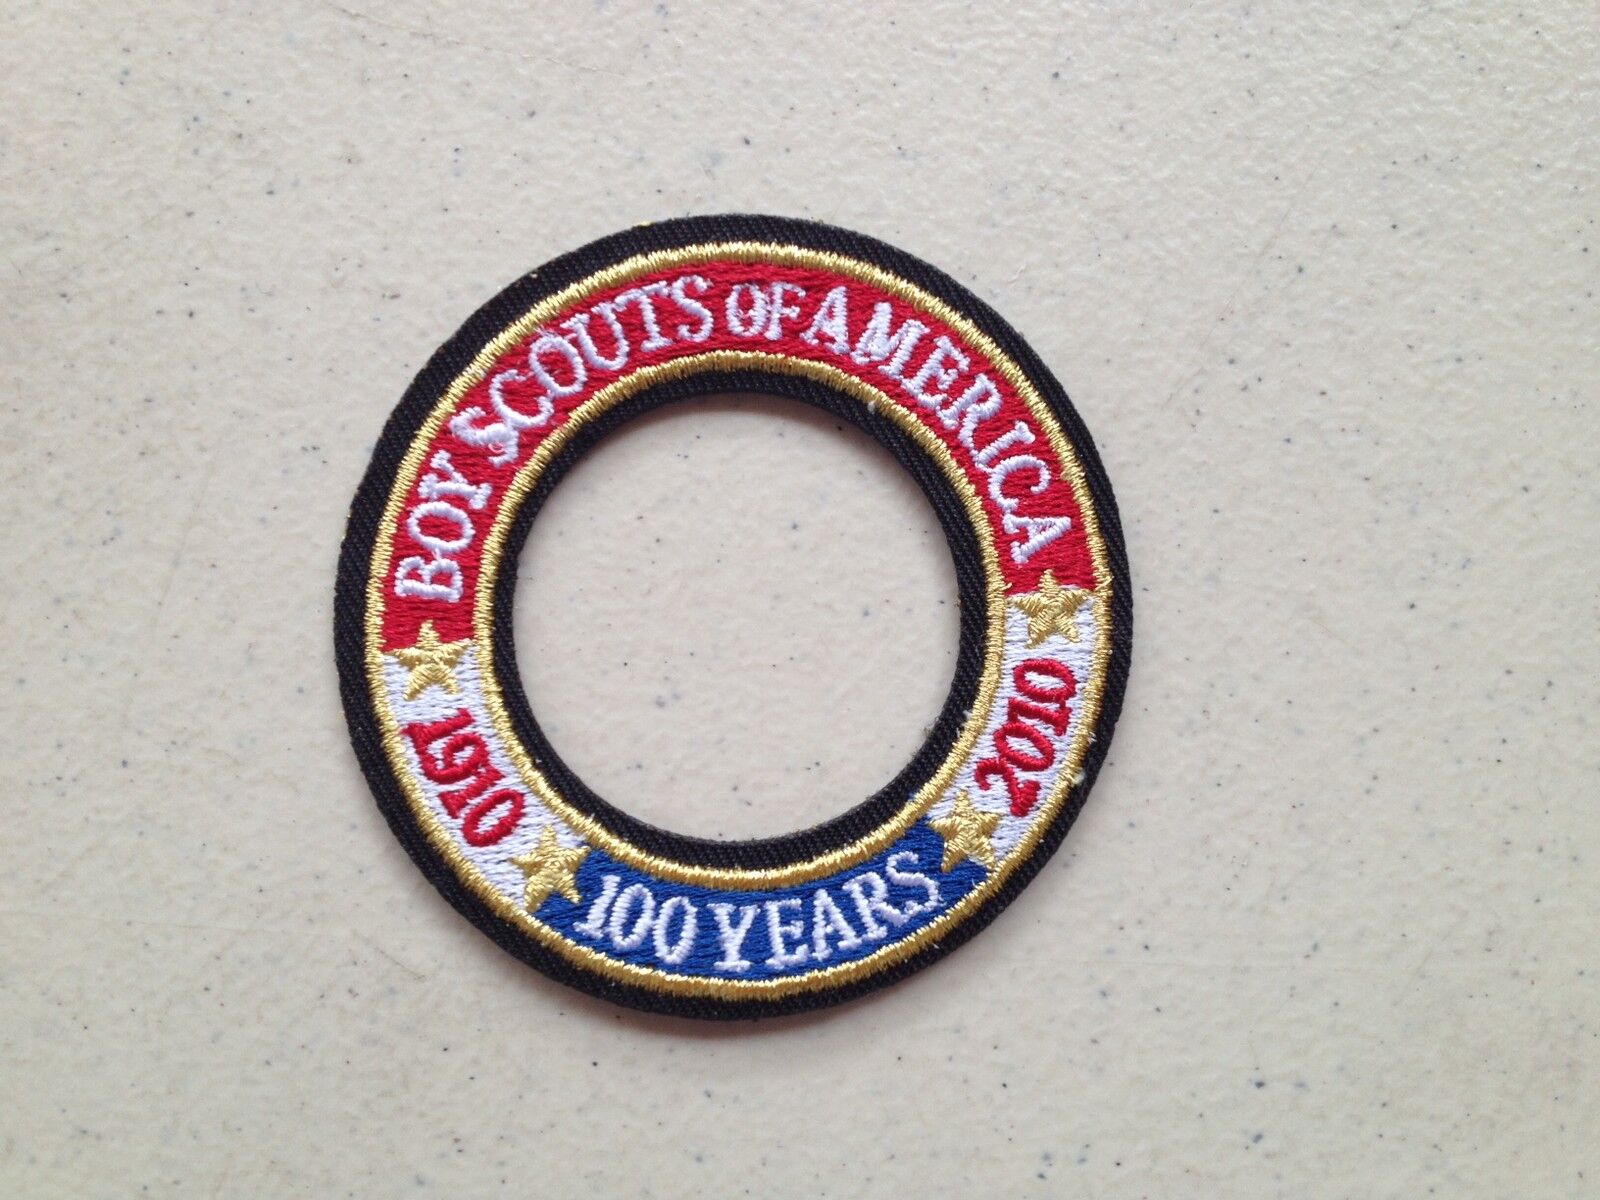 Boy Scouts BSA 100 Year Anniversary Patch - BRAND NEW